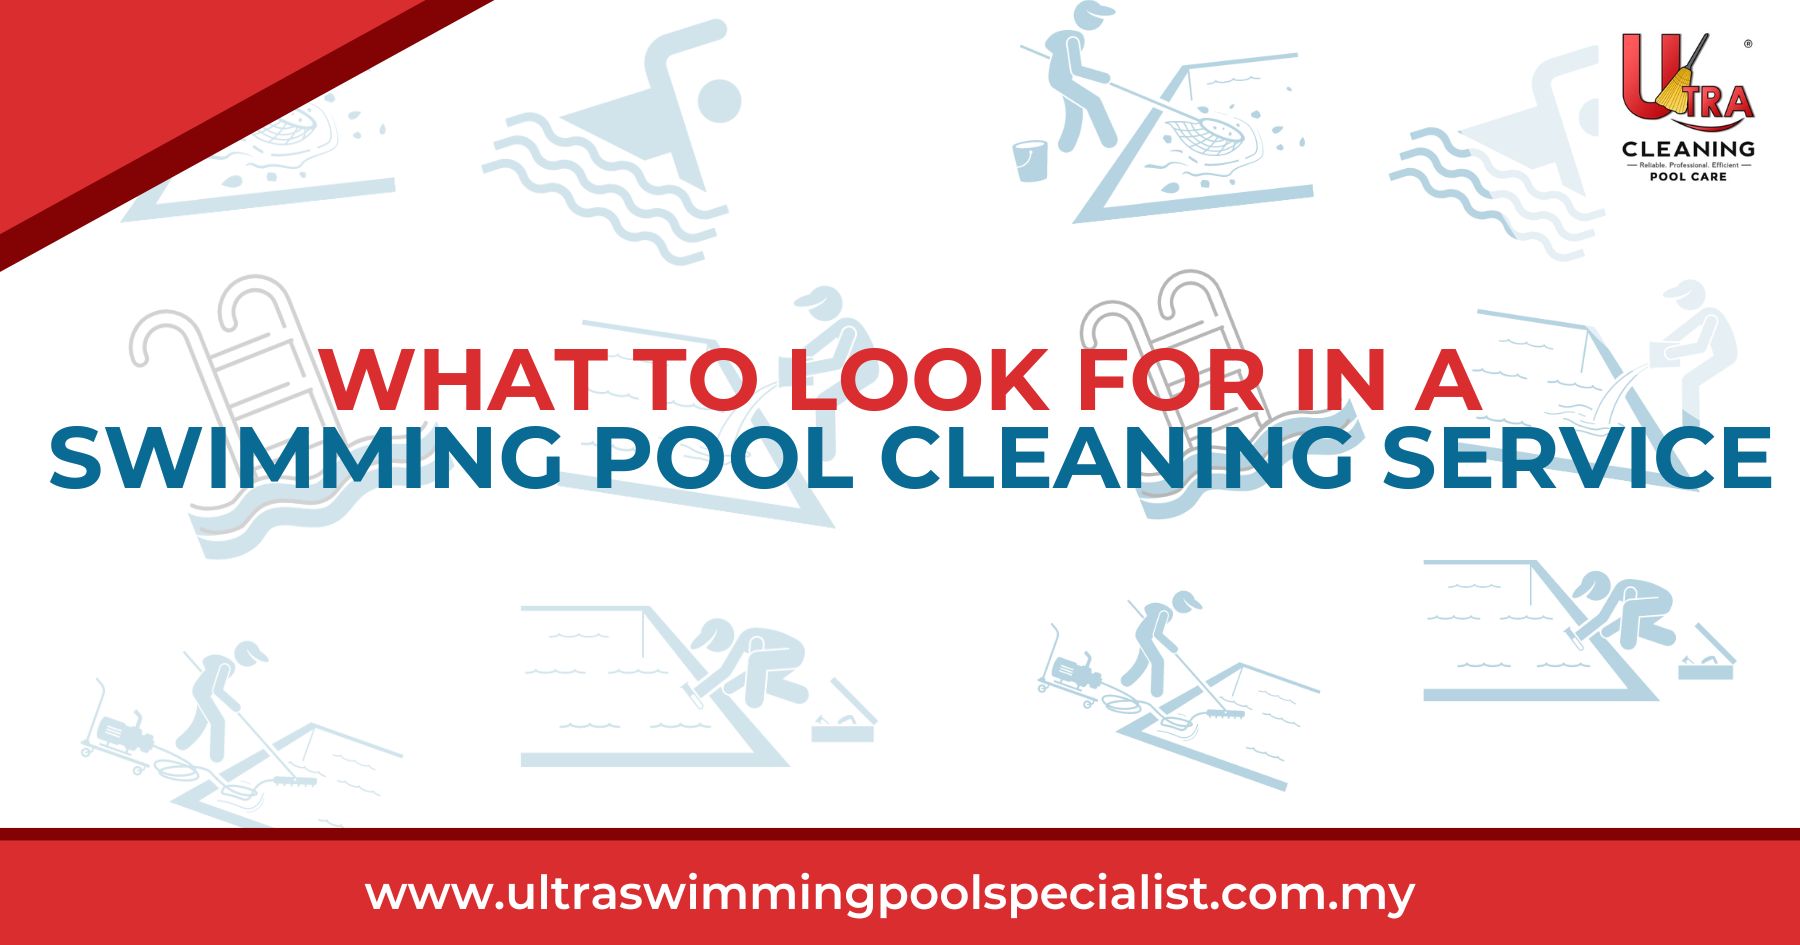 What To Look For in a Swimming Pool Cleaning Service